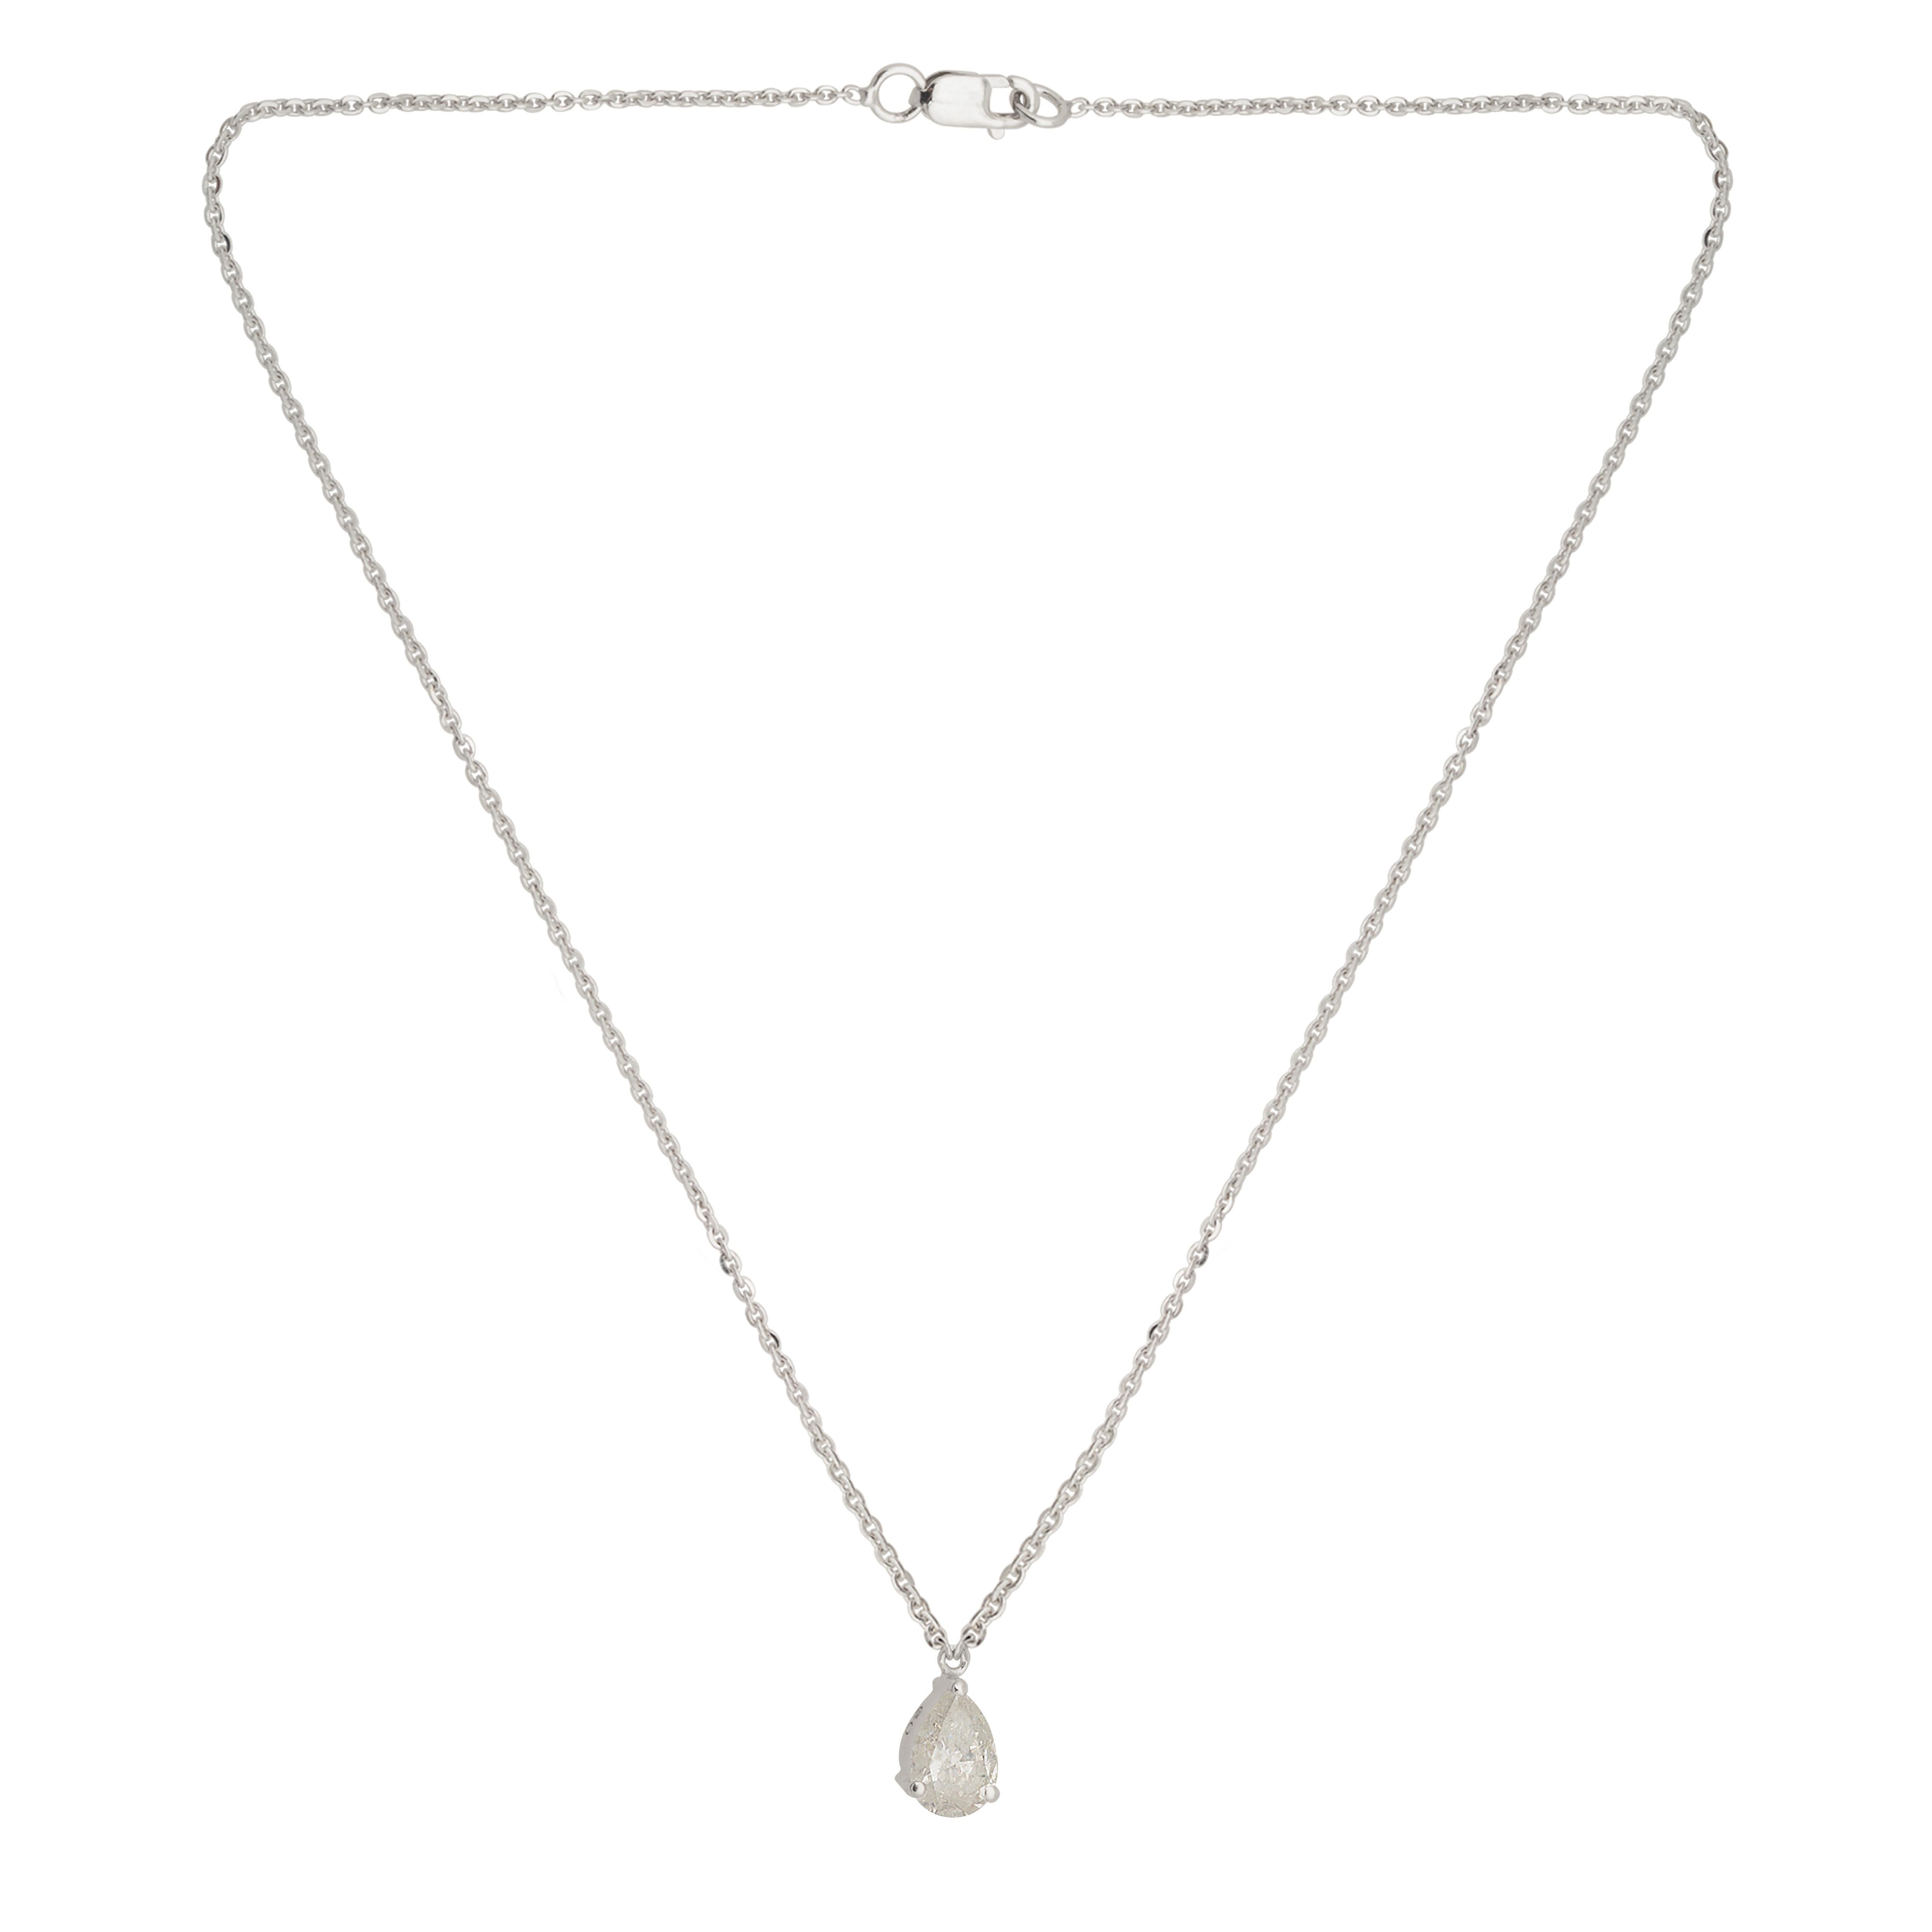 This exquisite charm pendant necklace features a 0.57 carat diamond with SI clarity and HI color, set in a pear shape, and crafted in 14 karat white gold. Meticulously handcrafted with attention to detail, this piece of jewelry radiates elegance,